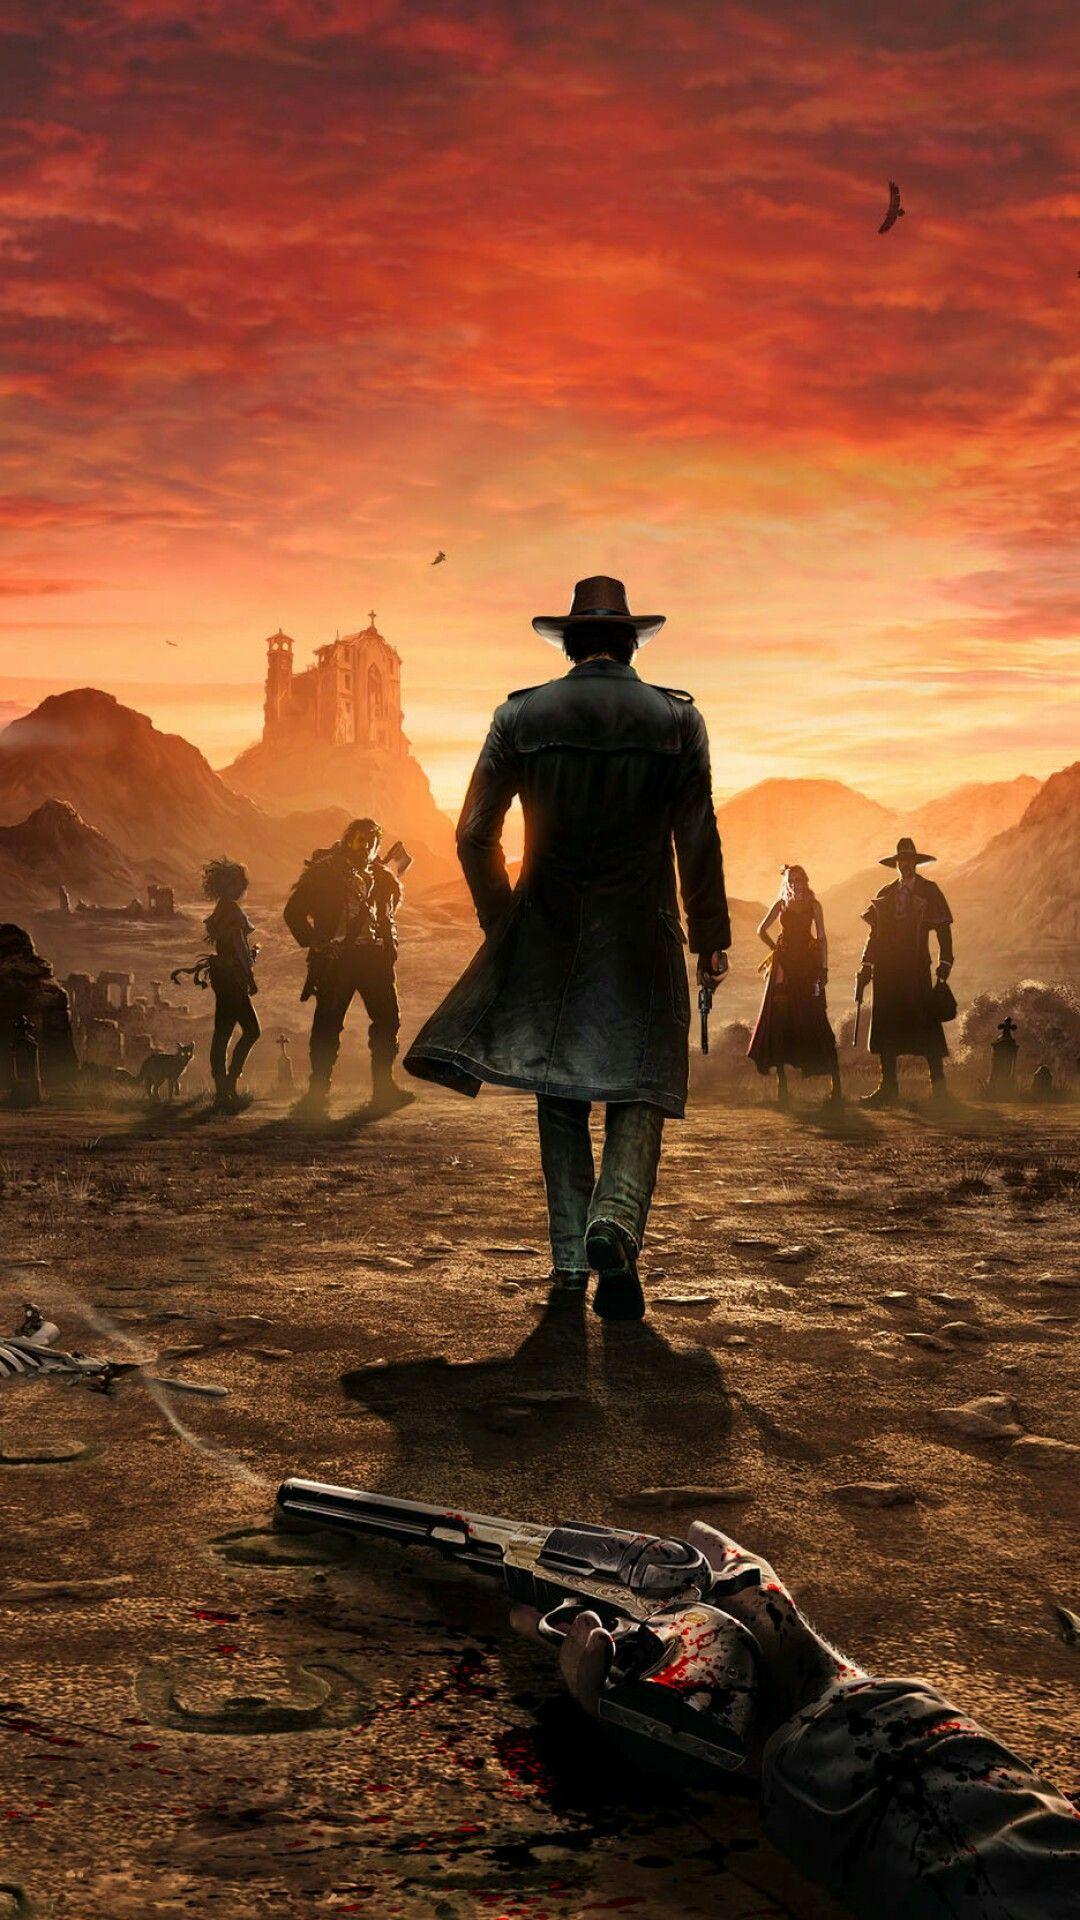 Red dead2. Red dead redemption, Red dead redemption Red dead